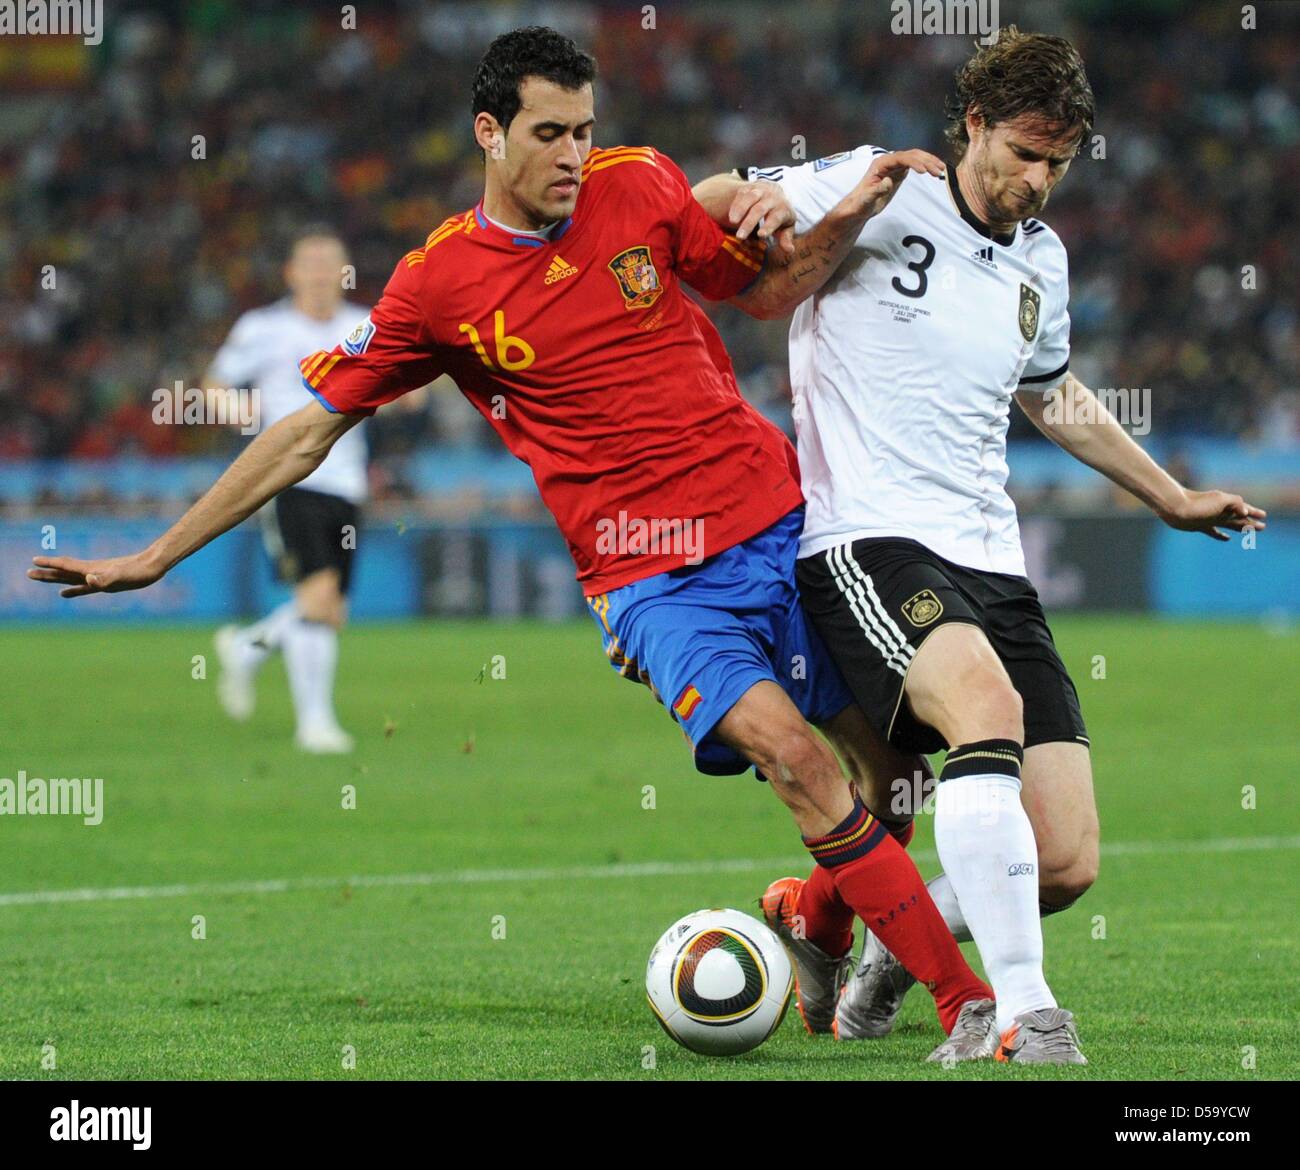 Arne Friedrich (R) of Germany vies with Sergio Busquets of Spain during the 2010 FIFA World Cup semi-final match between Germany and Spain at the Durban Stadium in Durban, South Africa 07 July 2010. Photo: Bernd Weissbrod dpa - Please refer to http://dpaq.de/FIFA-WM2010-TC  +++(c) dpa - Bildfunk+++ Stock Photo